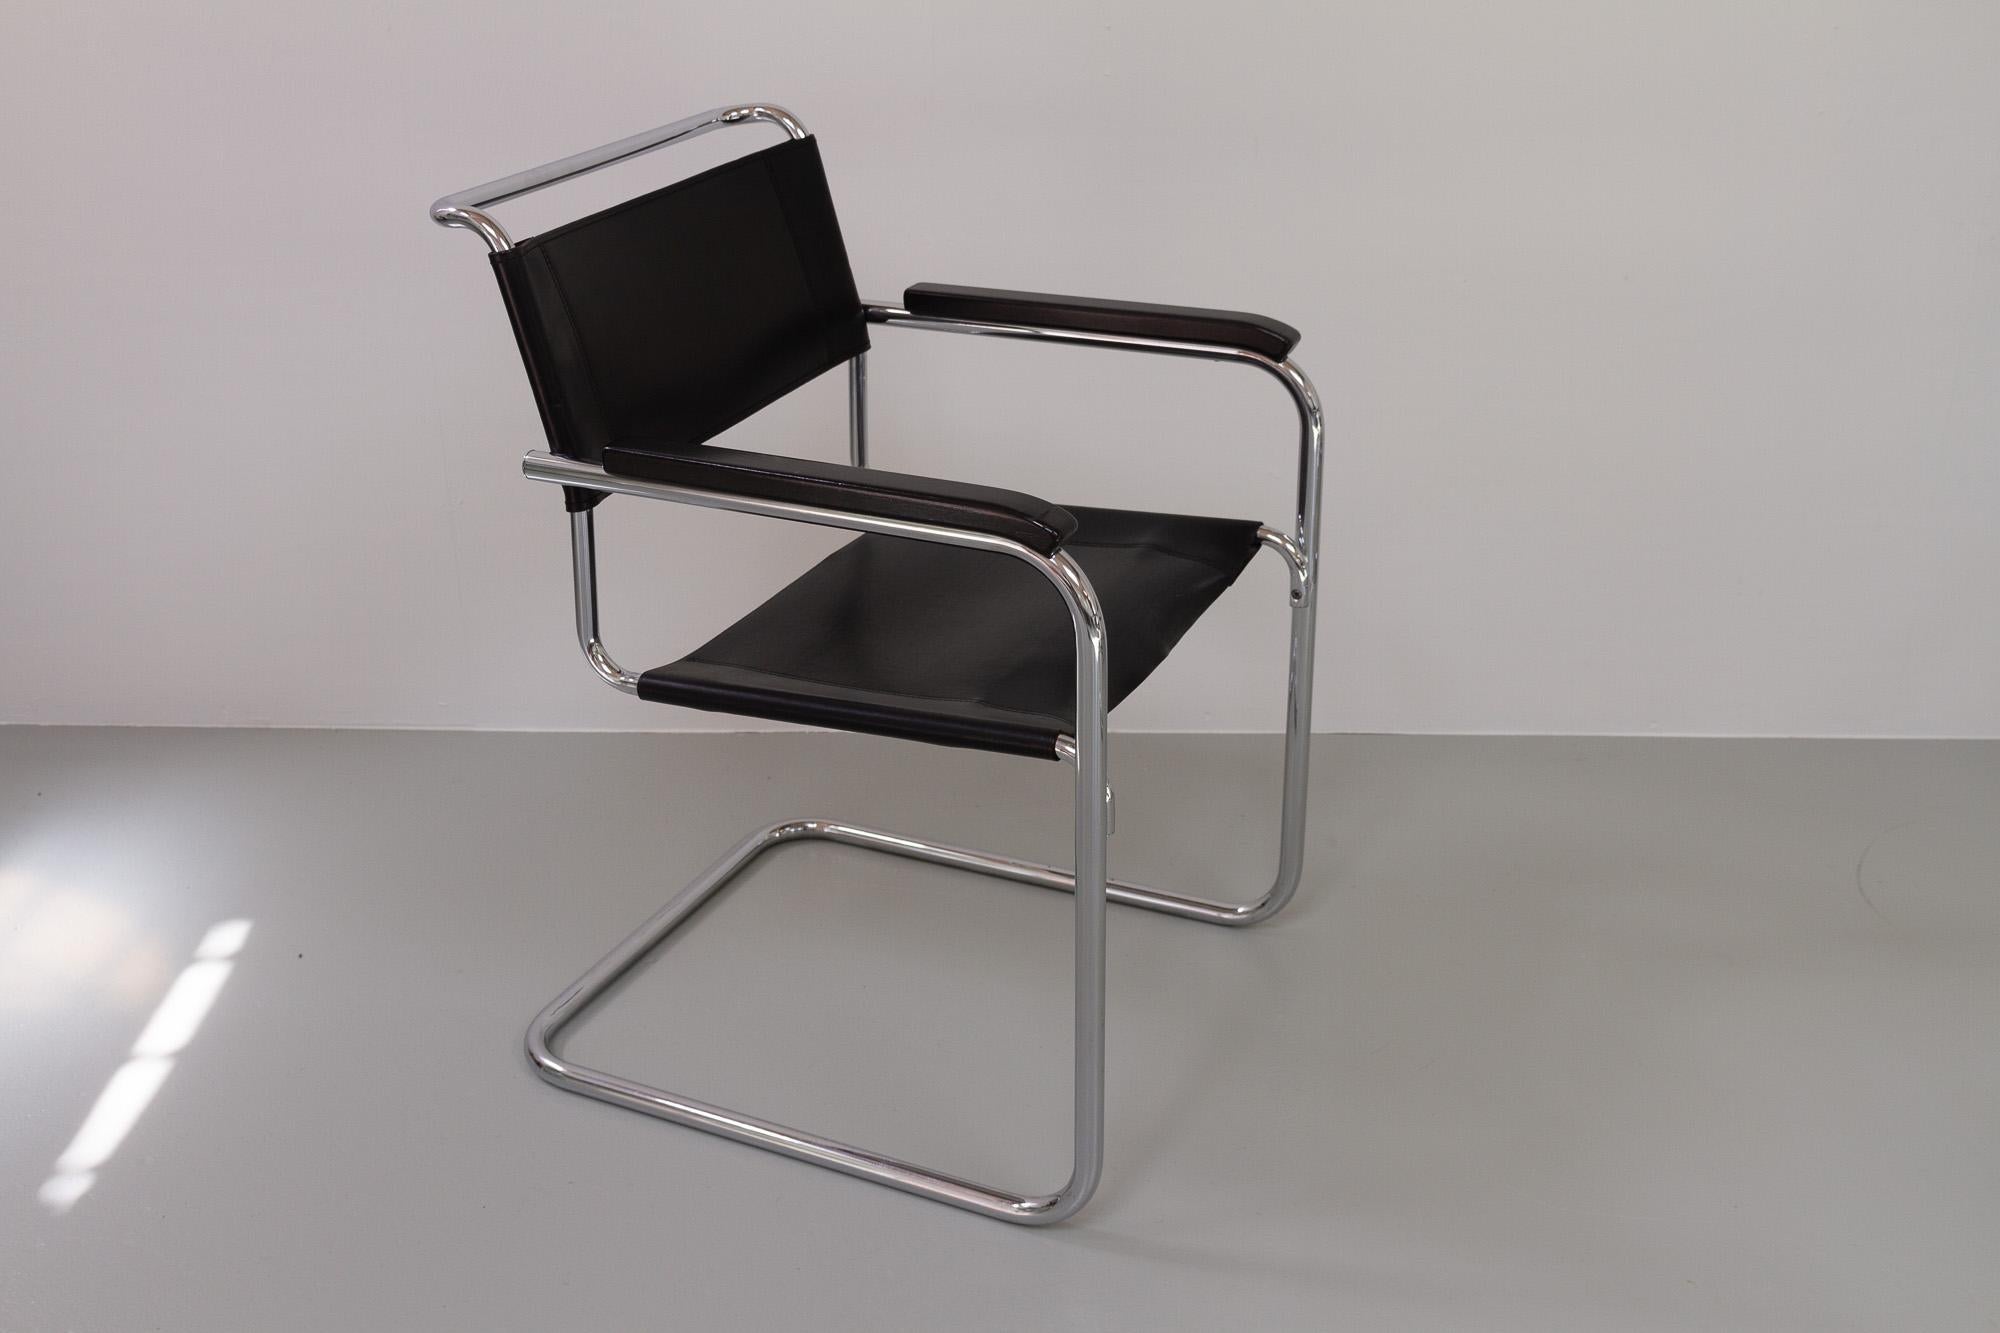 Steel Vintage Cantilever Chairs S34 by Mart Stam for Thonet, 1980s. Set of 6.